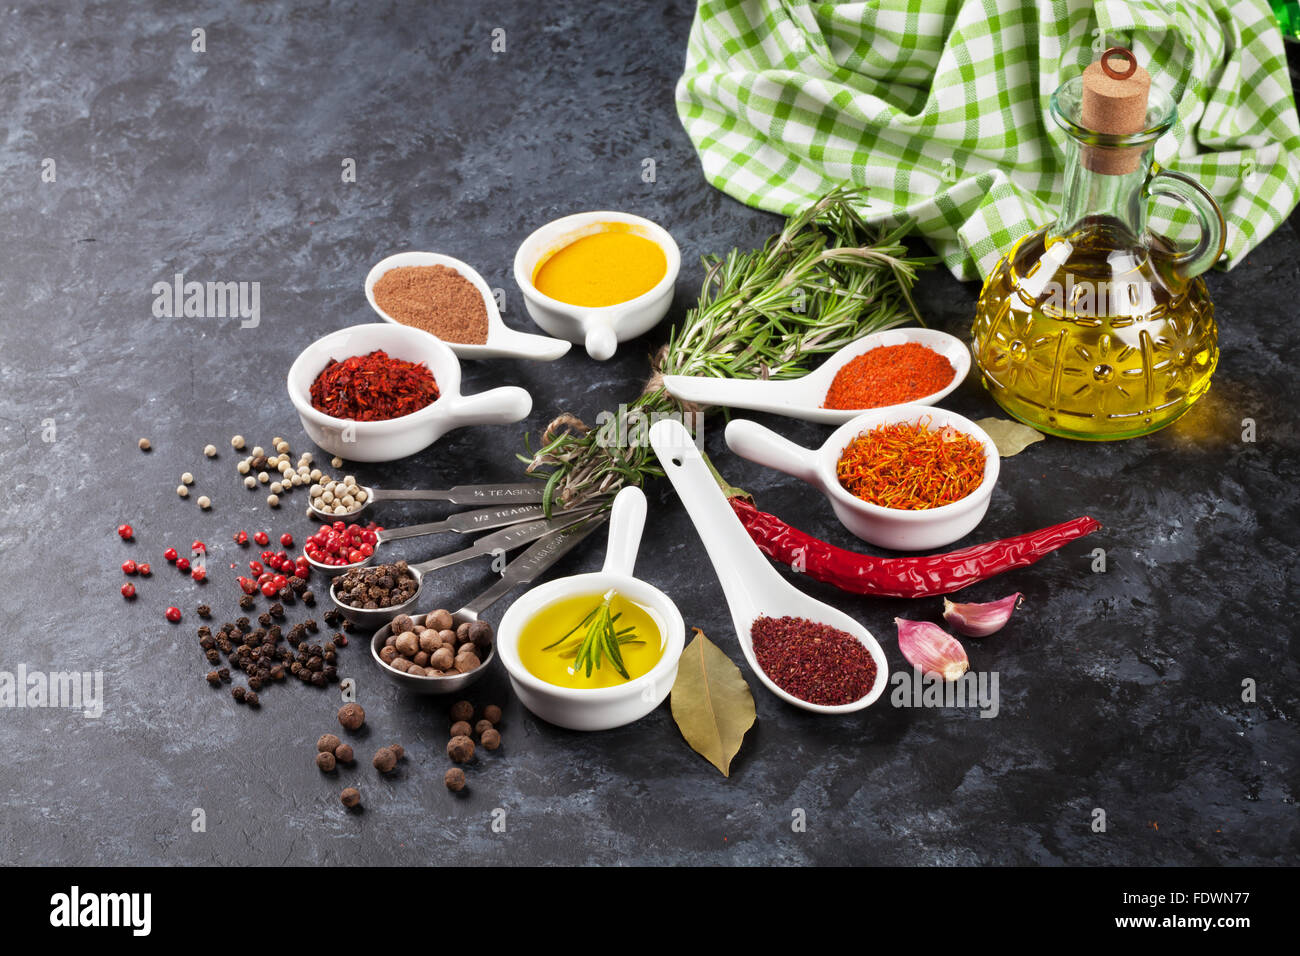 Herbs and spices on stone table Stock Photo